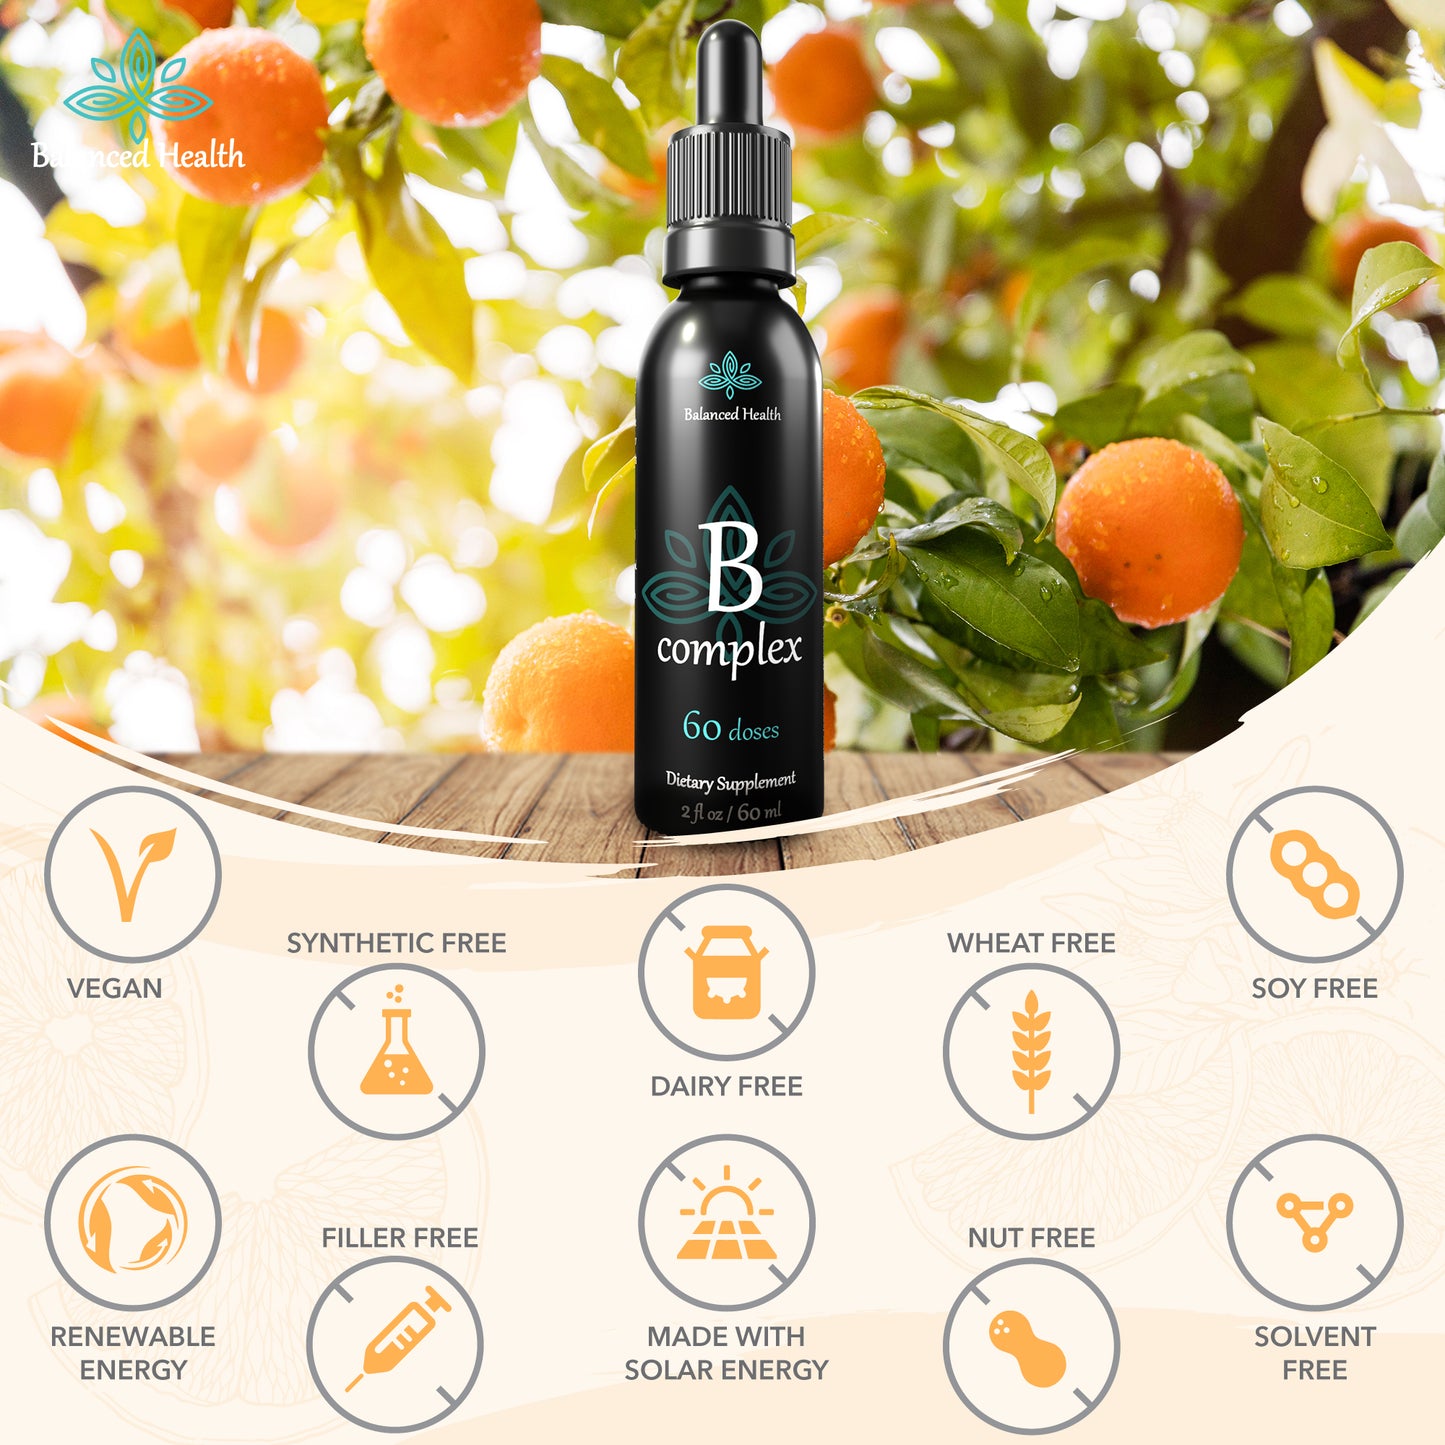 Balanced Health Liquid Vitamin B Complex is vegan and free from wheat, gluten and soy.